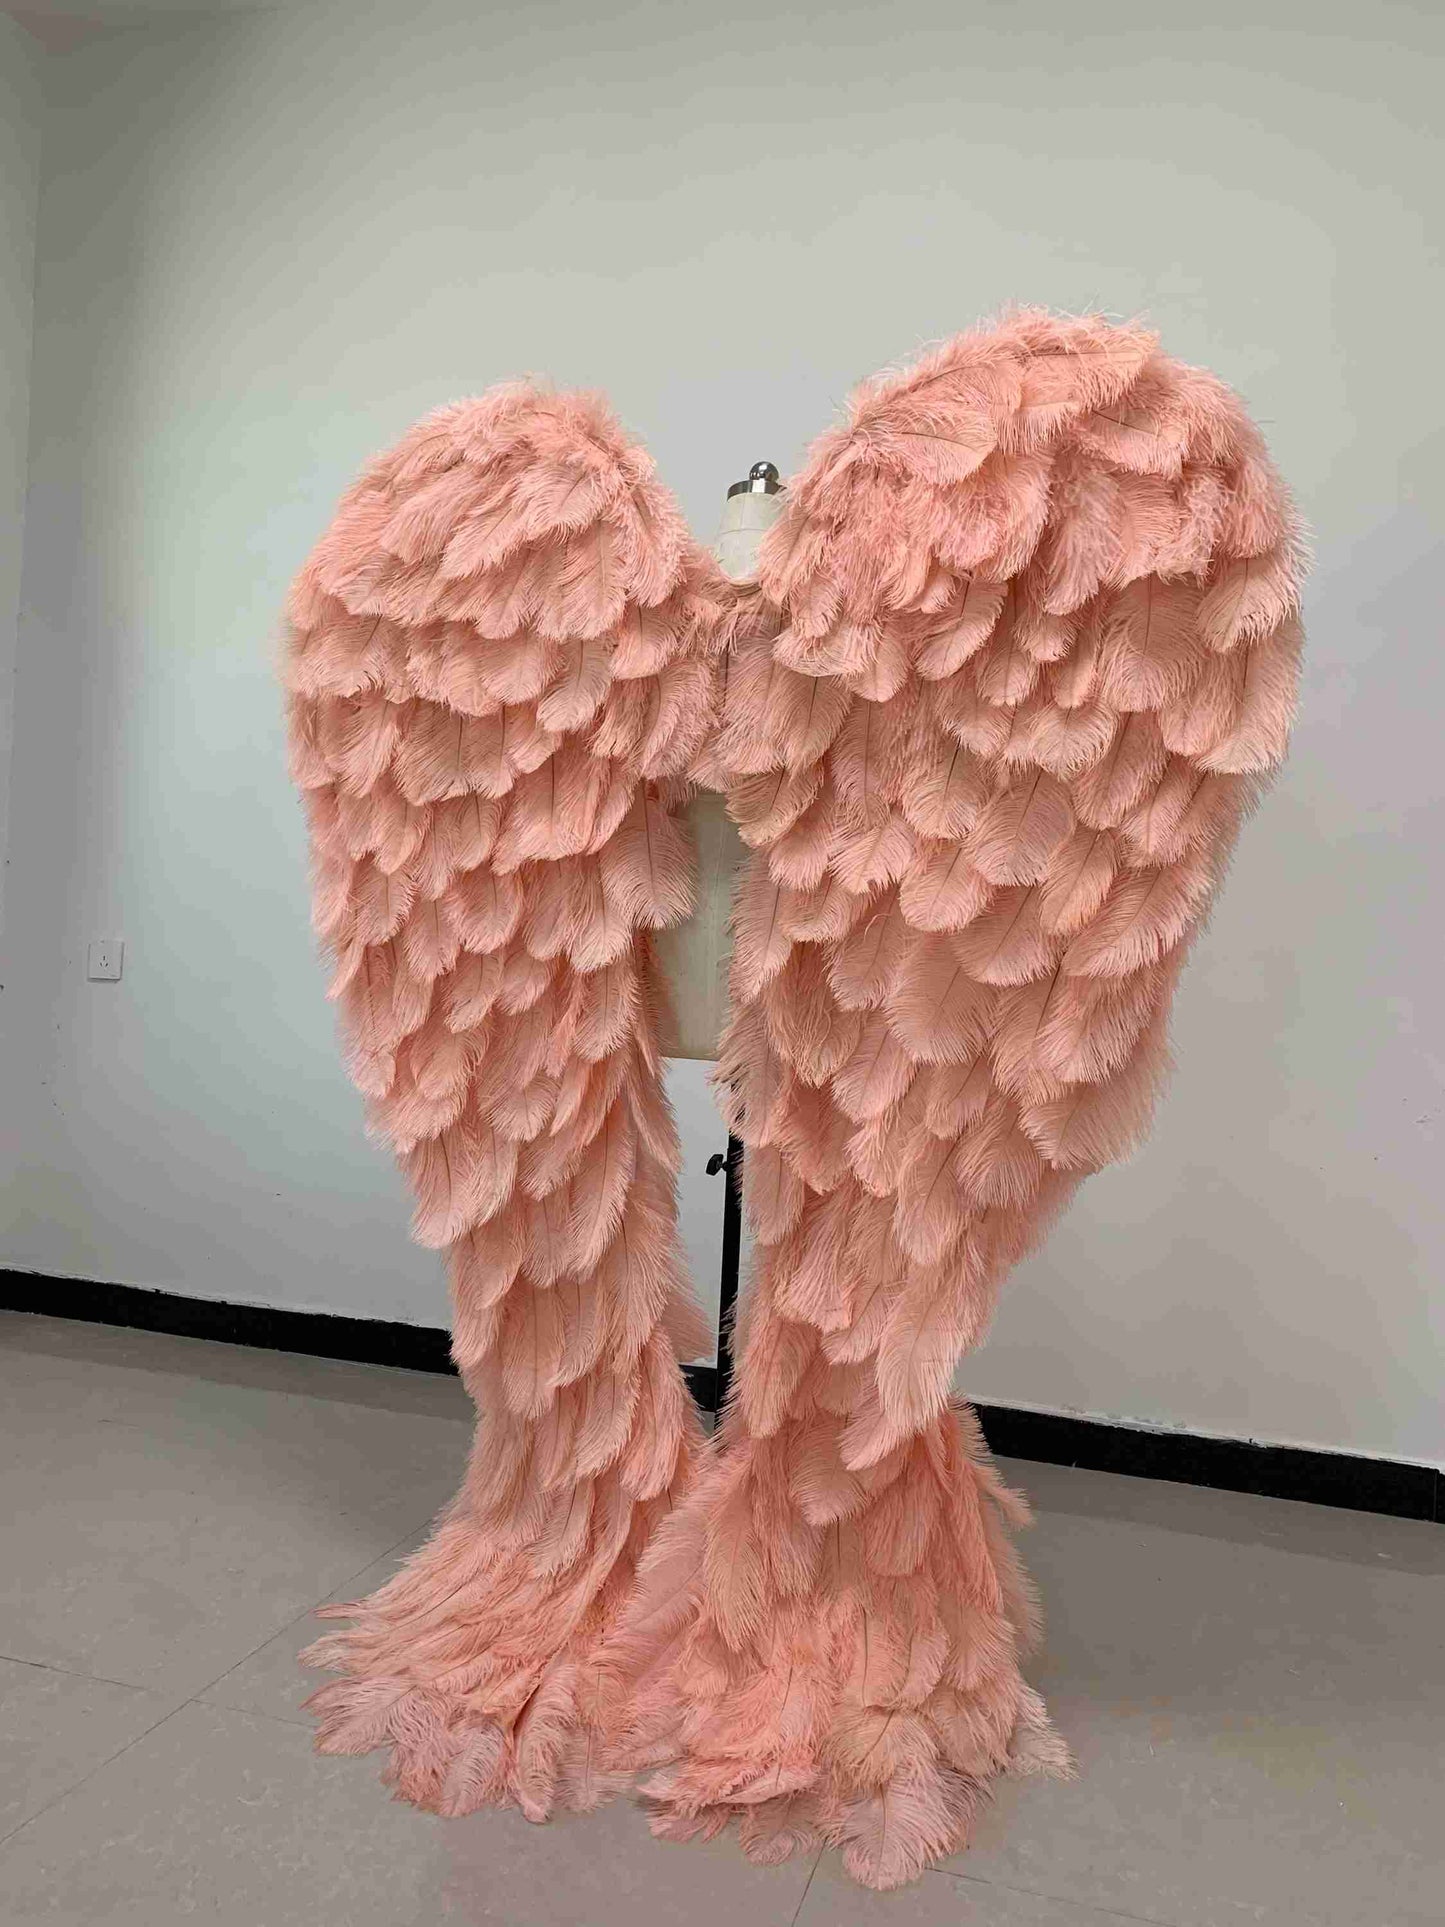 Our luxury pink angel wings from the back. Made from ostrich feathers. Wings for angel costume. Suitable for photoshoots especially for boudoirs.